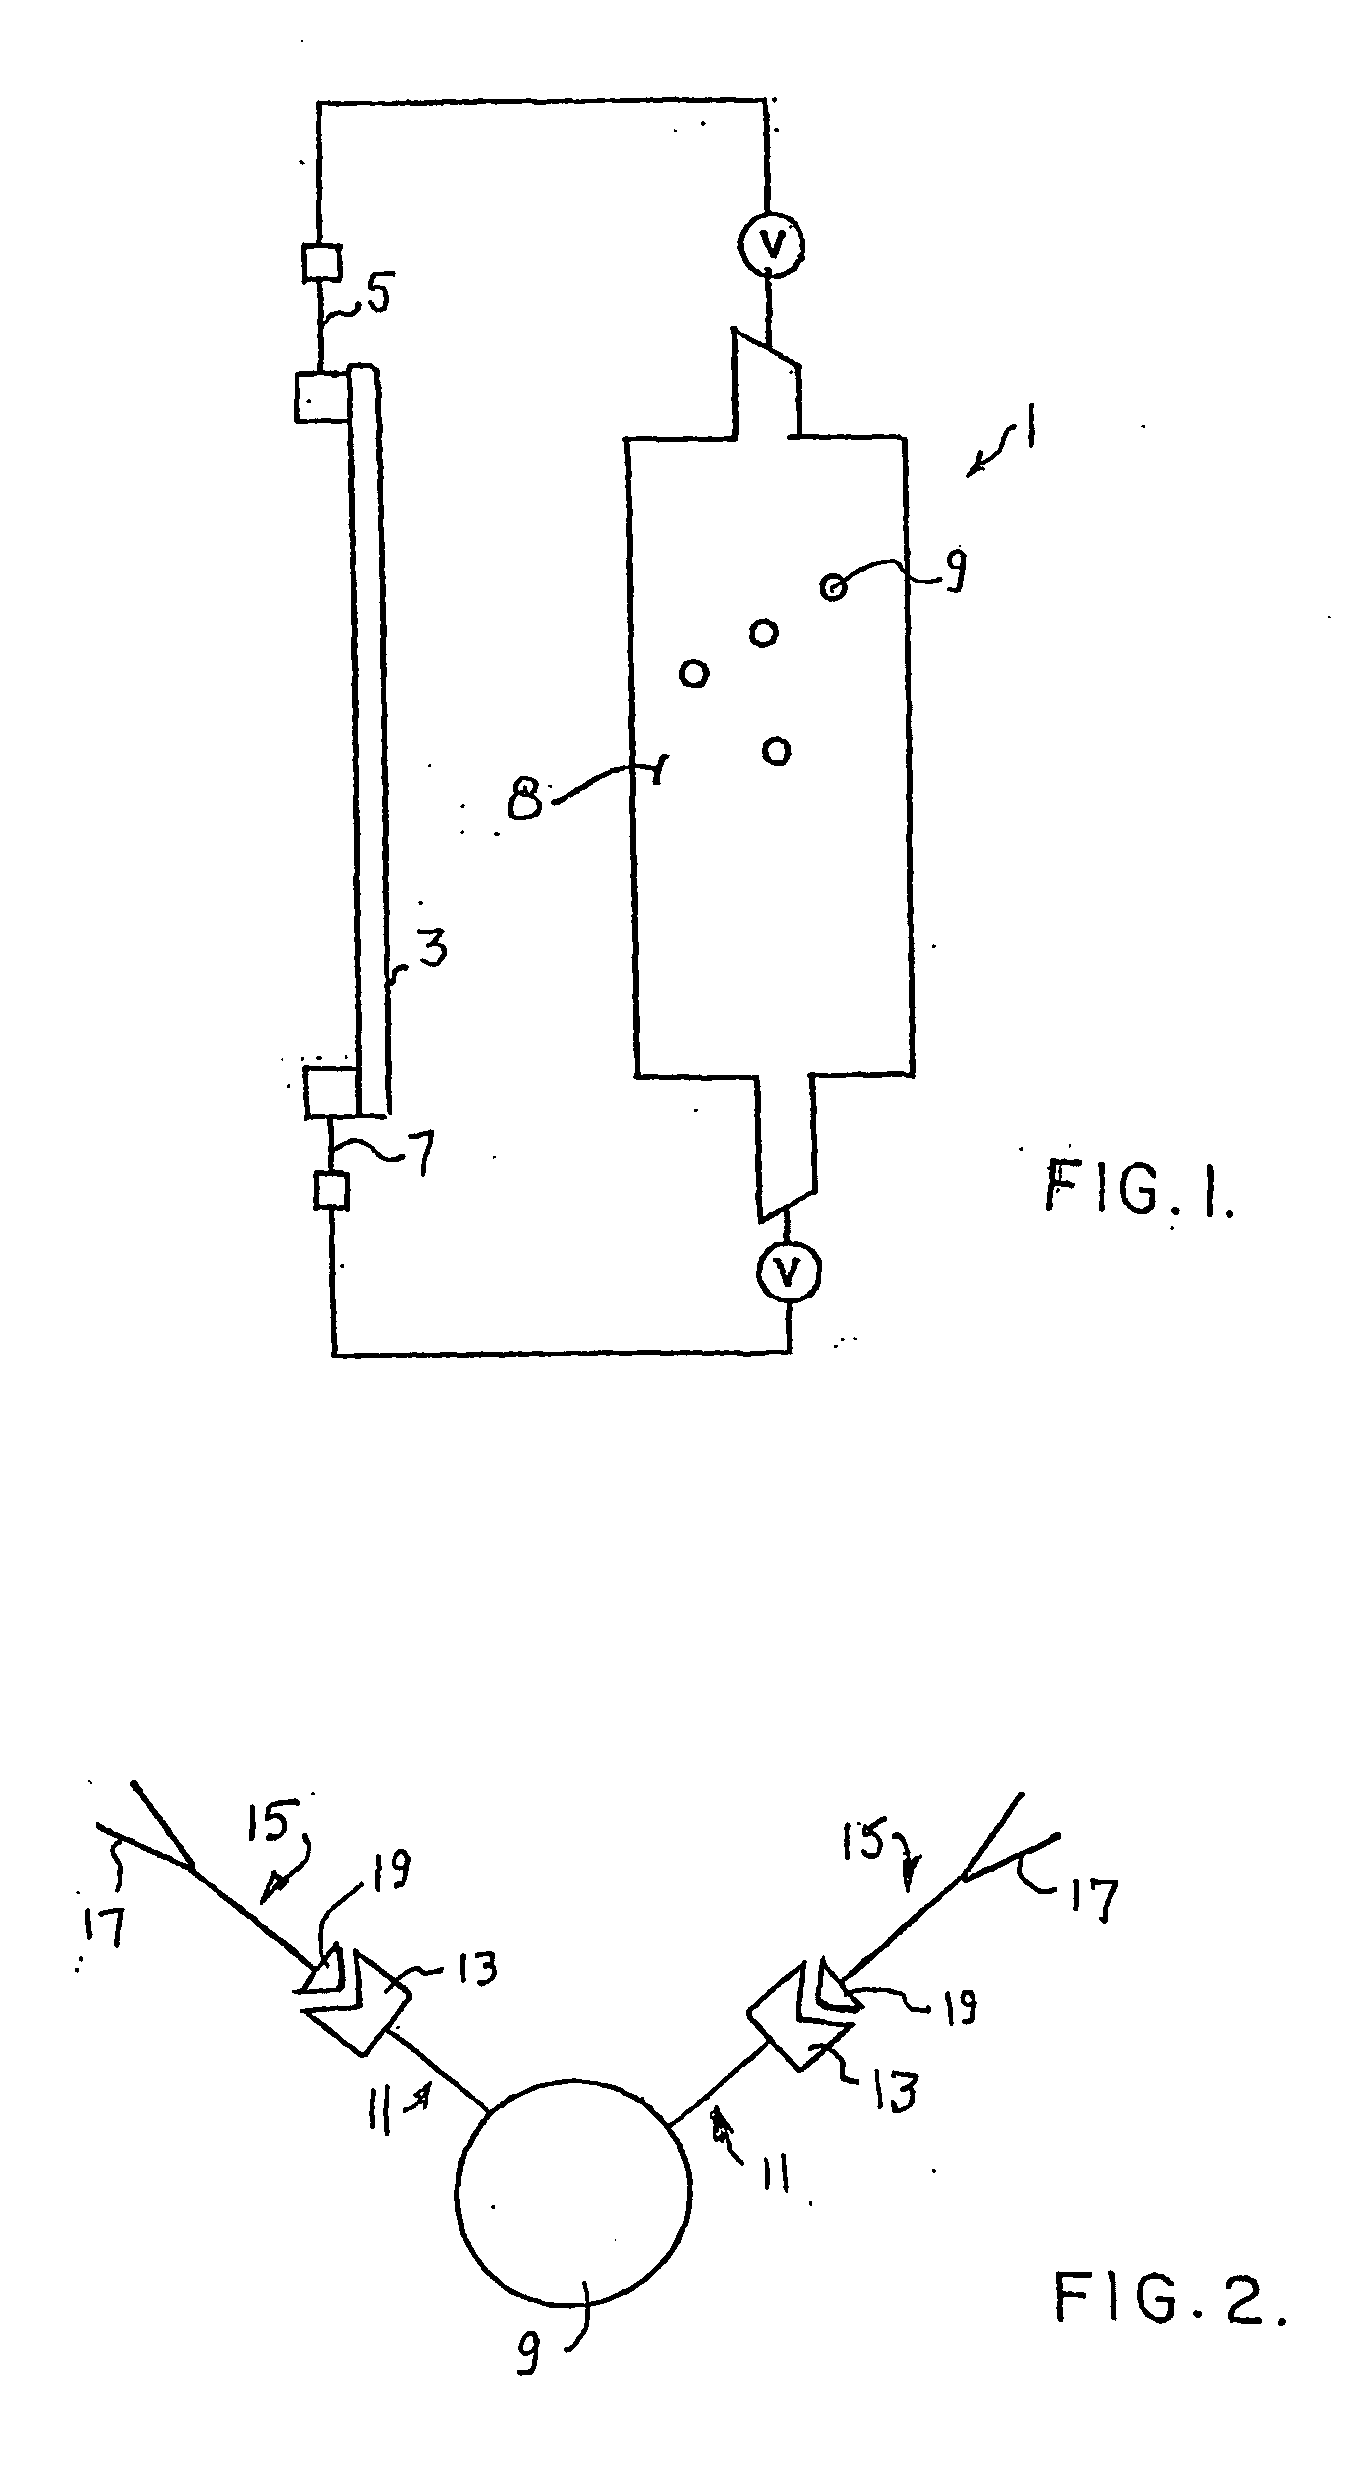 Methods and devices for targeting a site in a mammal and for removing species from a mammal